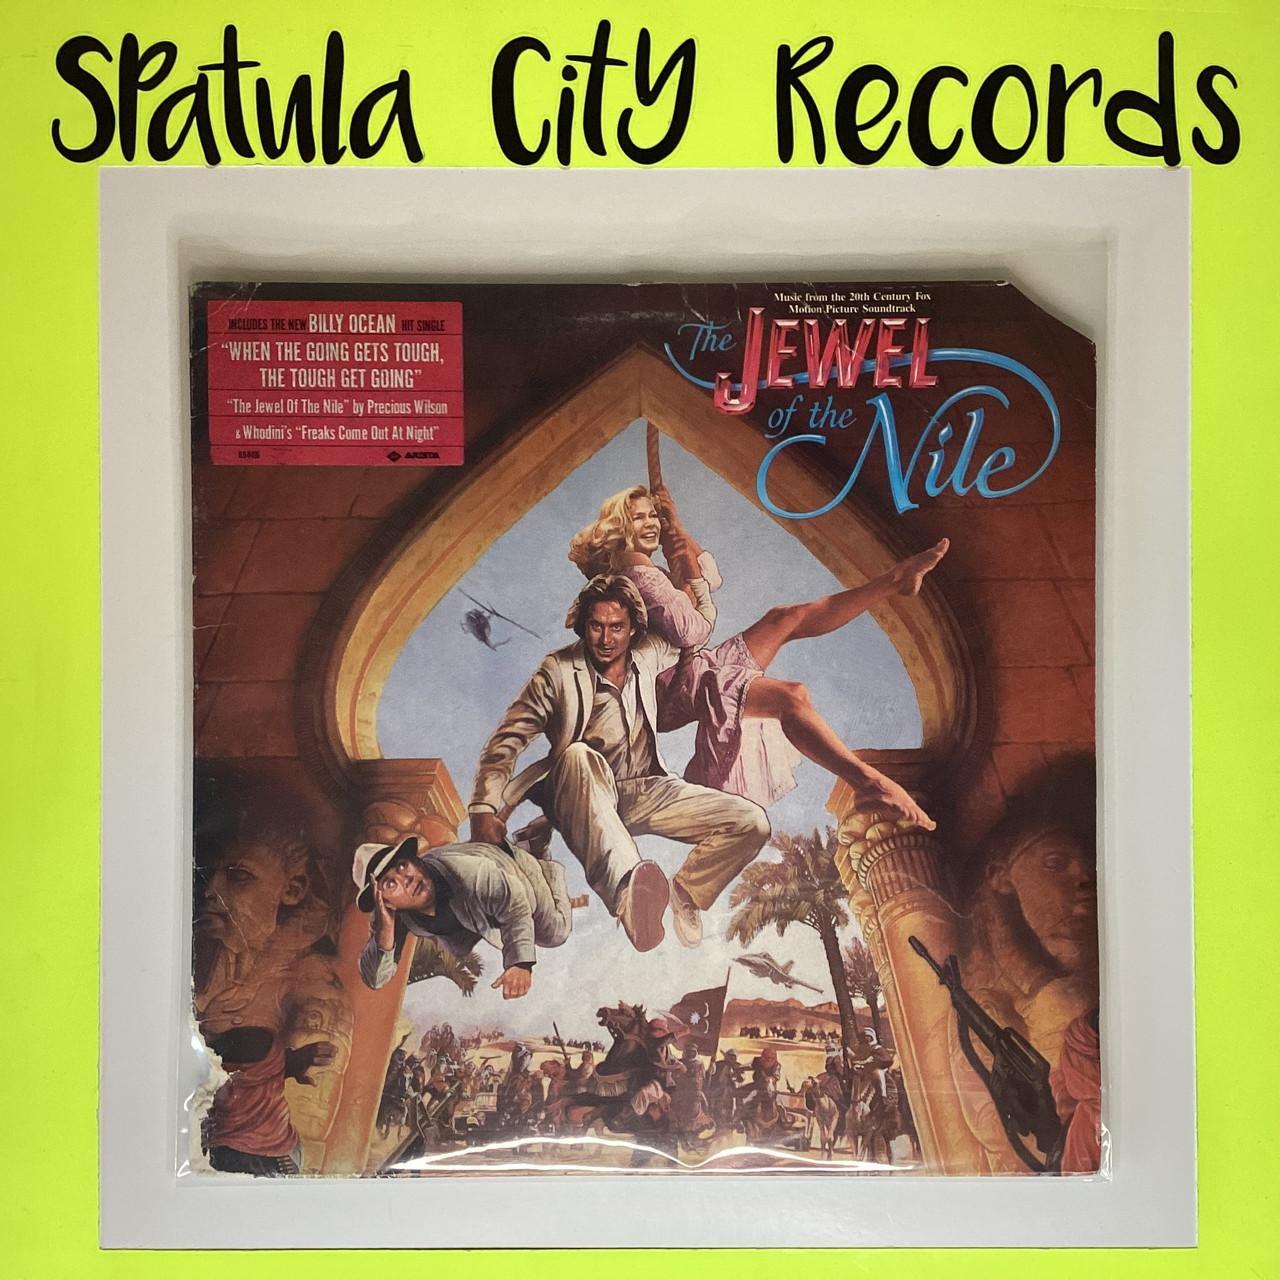 Jewel of the Nile - Music from the Motion Picture - soundtrack - vinyl record LP